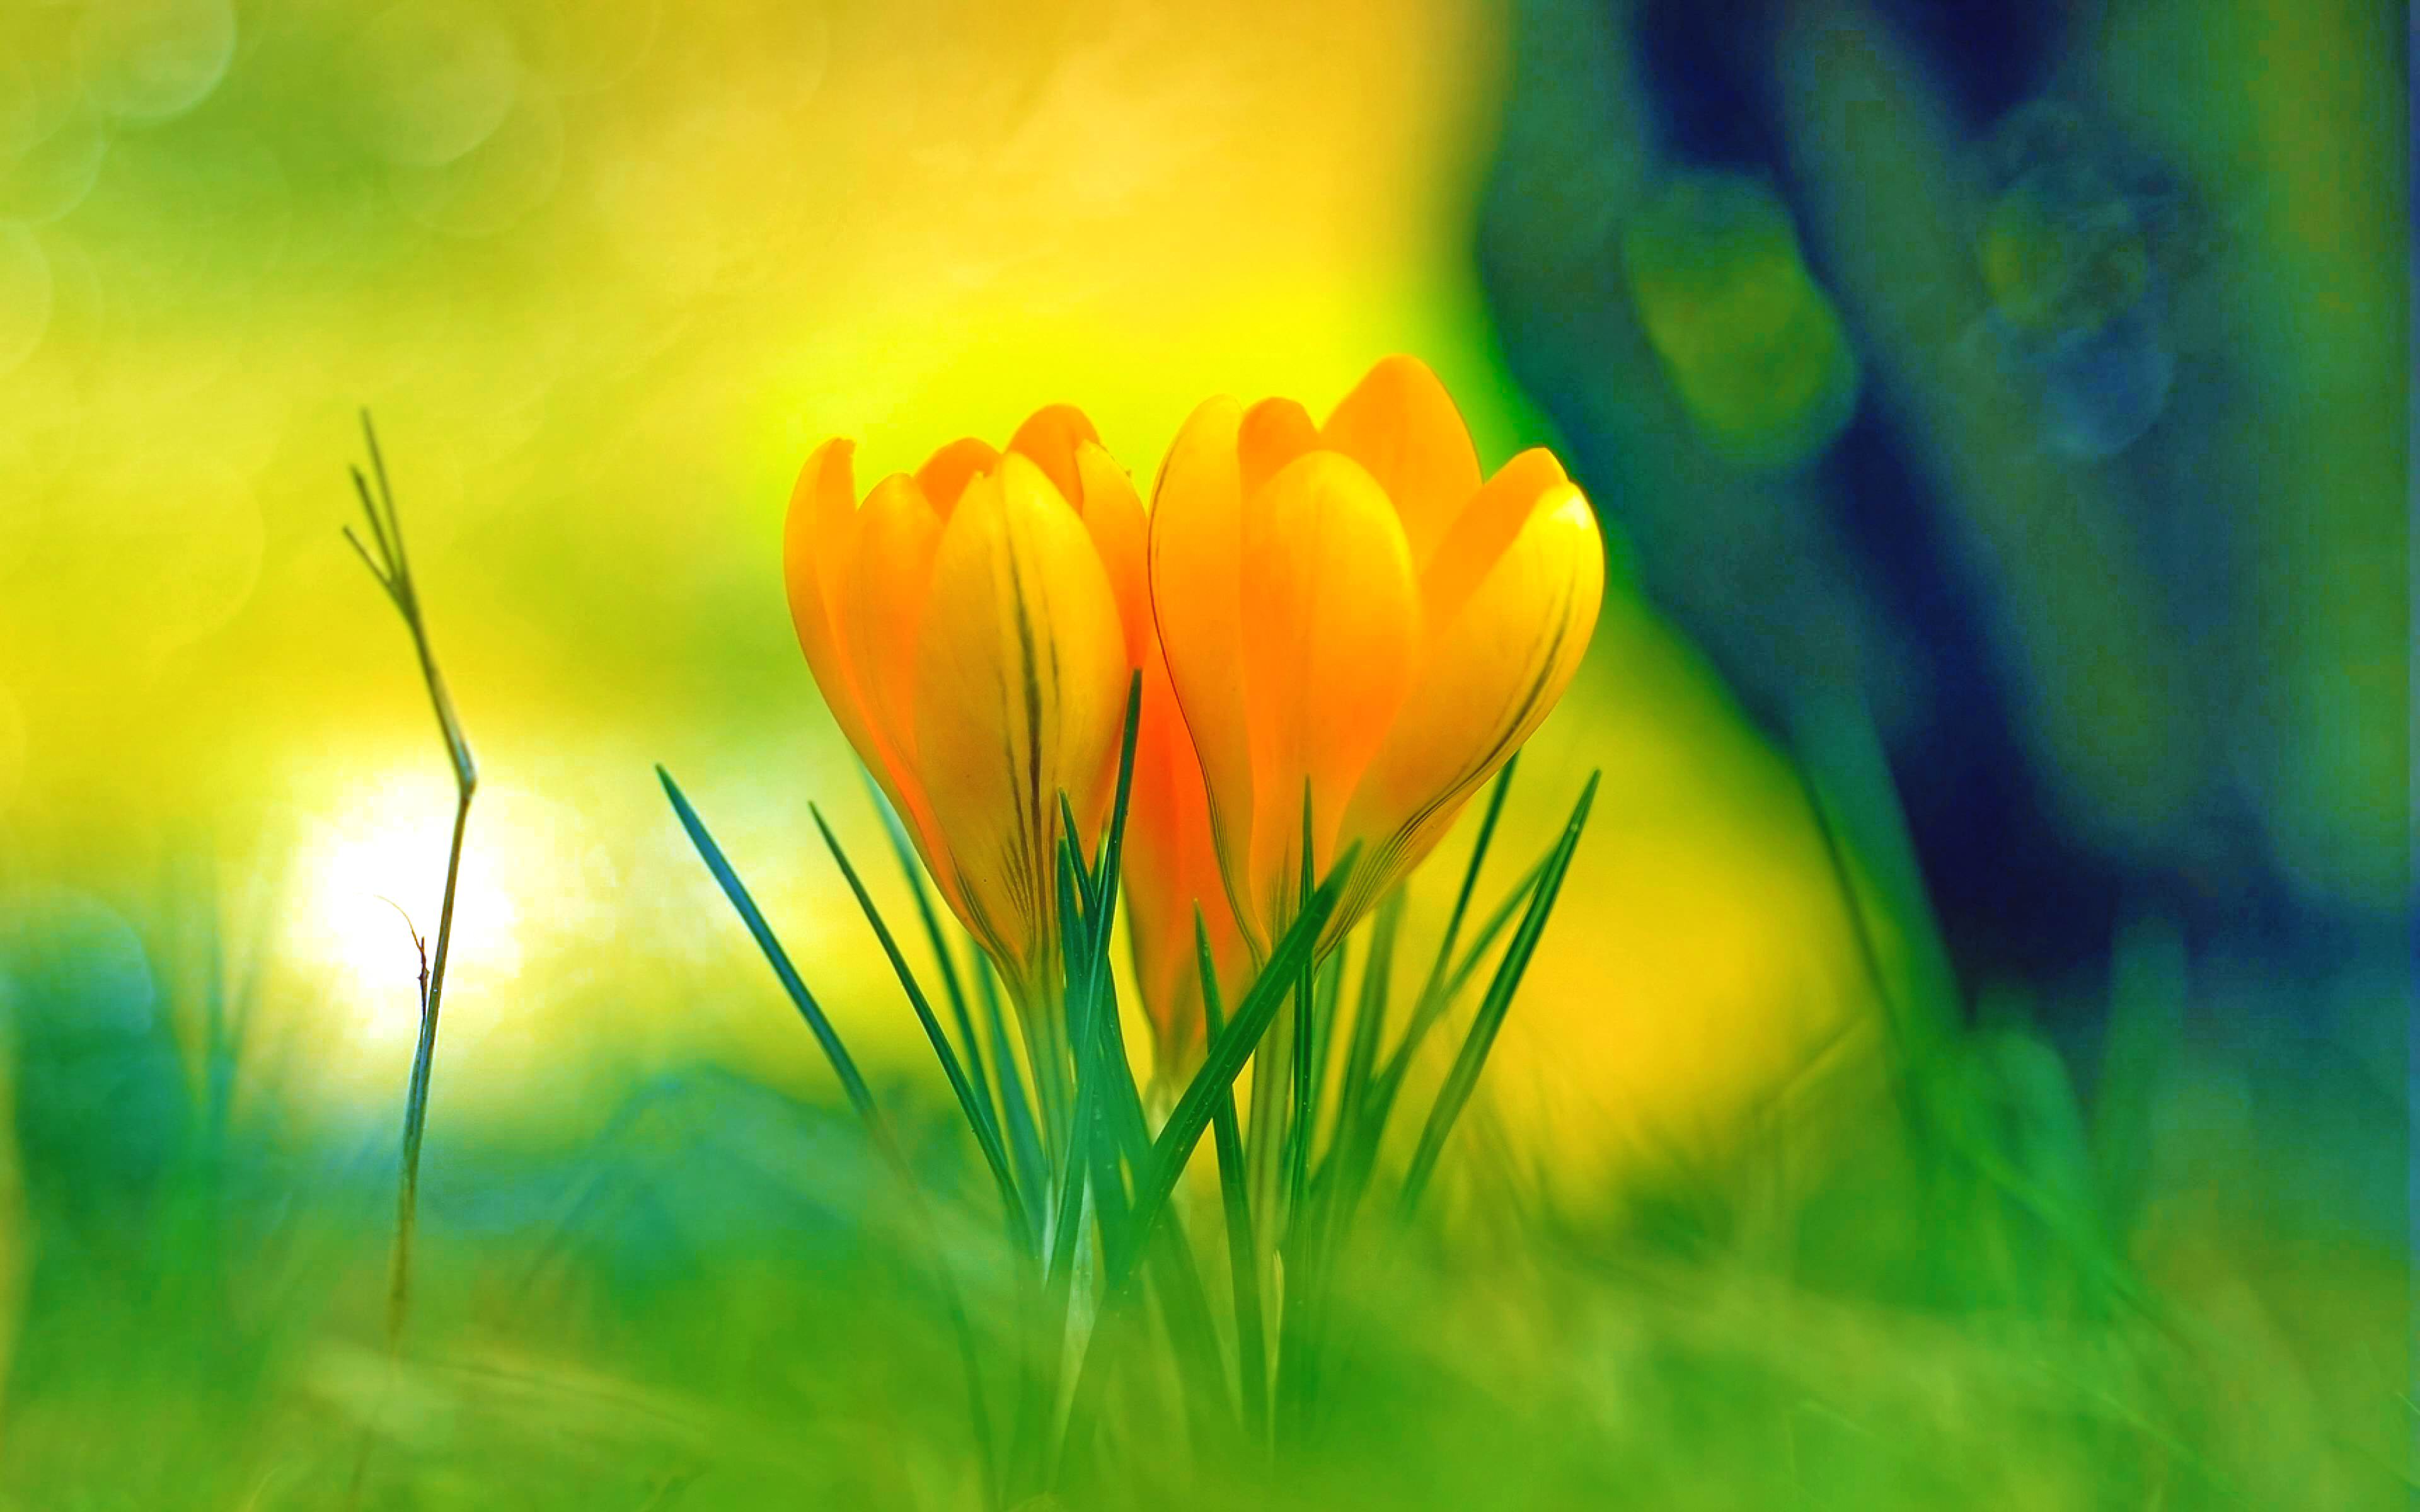 169+ Flower Backgrounds, Wallpapers, Pictures, Images | Design ...